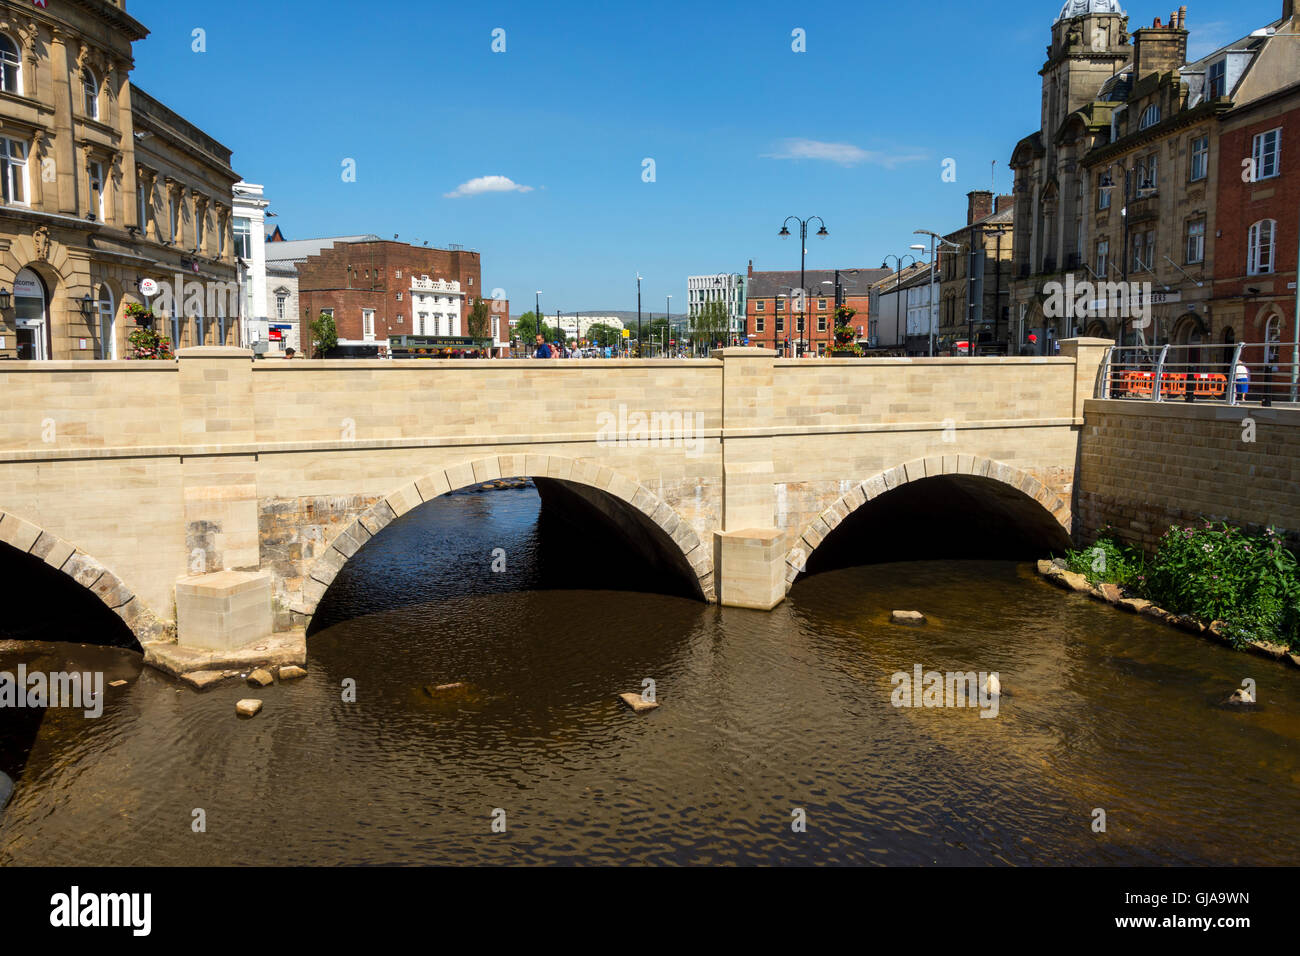 The recently exposed River Roch at Rochdale town centre, Greater Manchester, England, UK Stock Photo